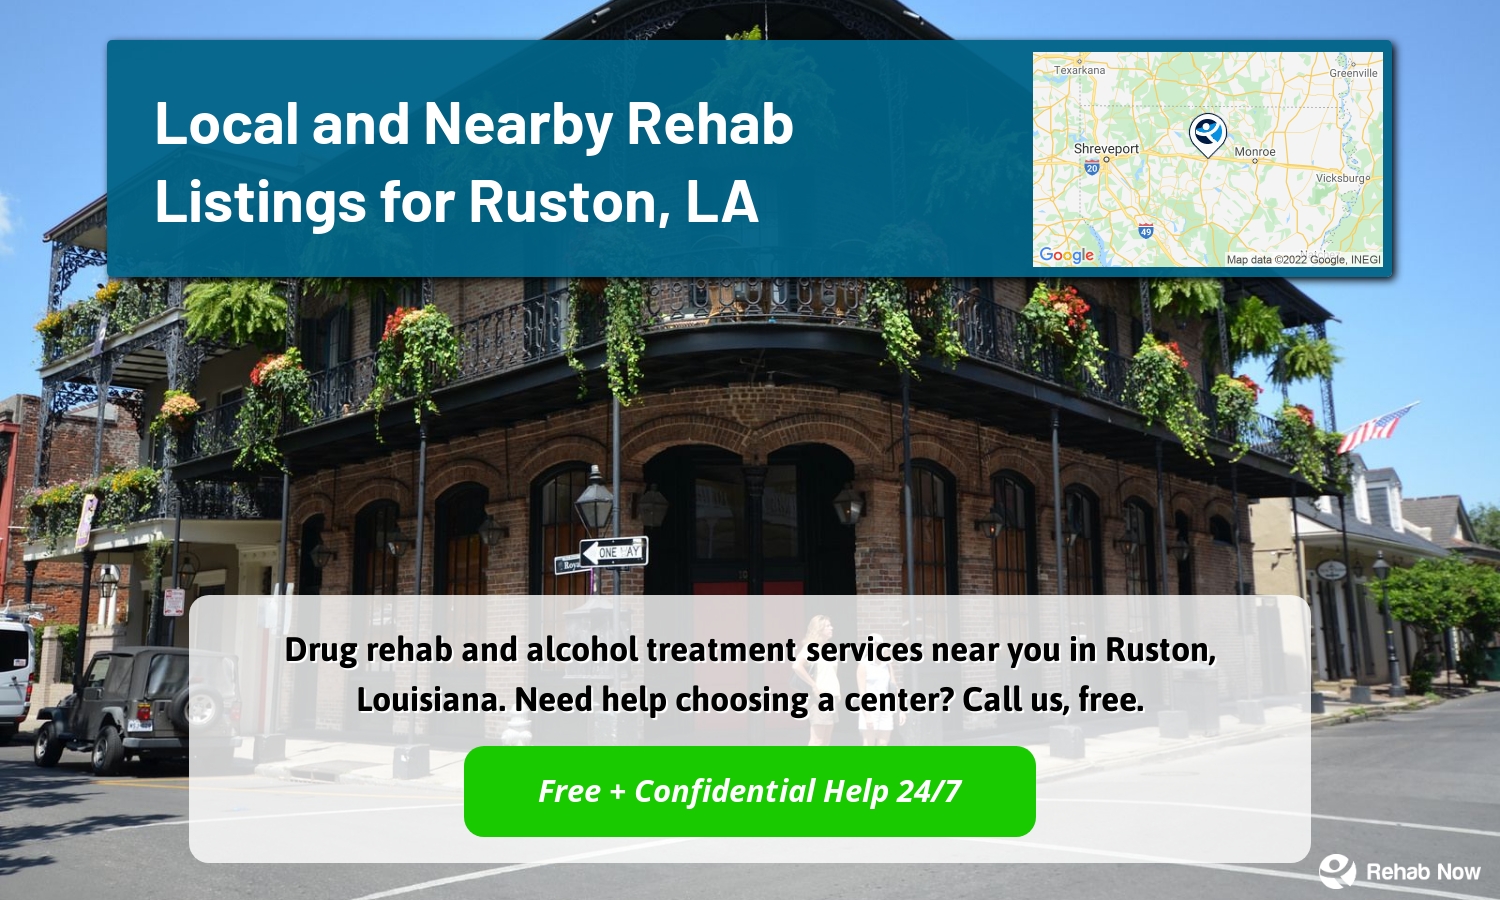 Drug rehab and alcohol treatment services near you in Ruston, Louisiana. Need help choosing a center? Call us, free.